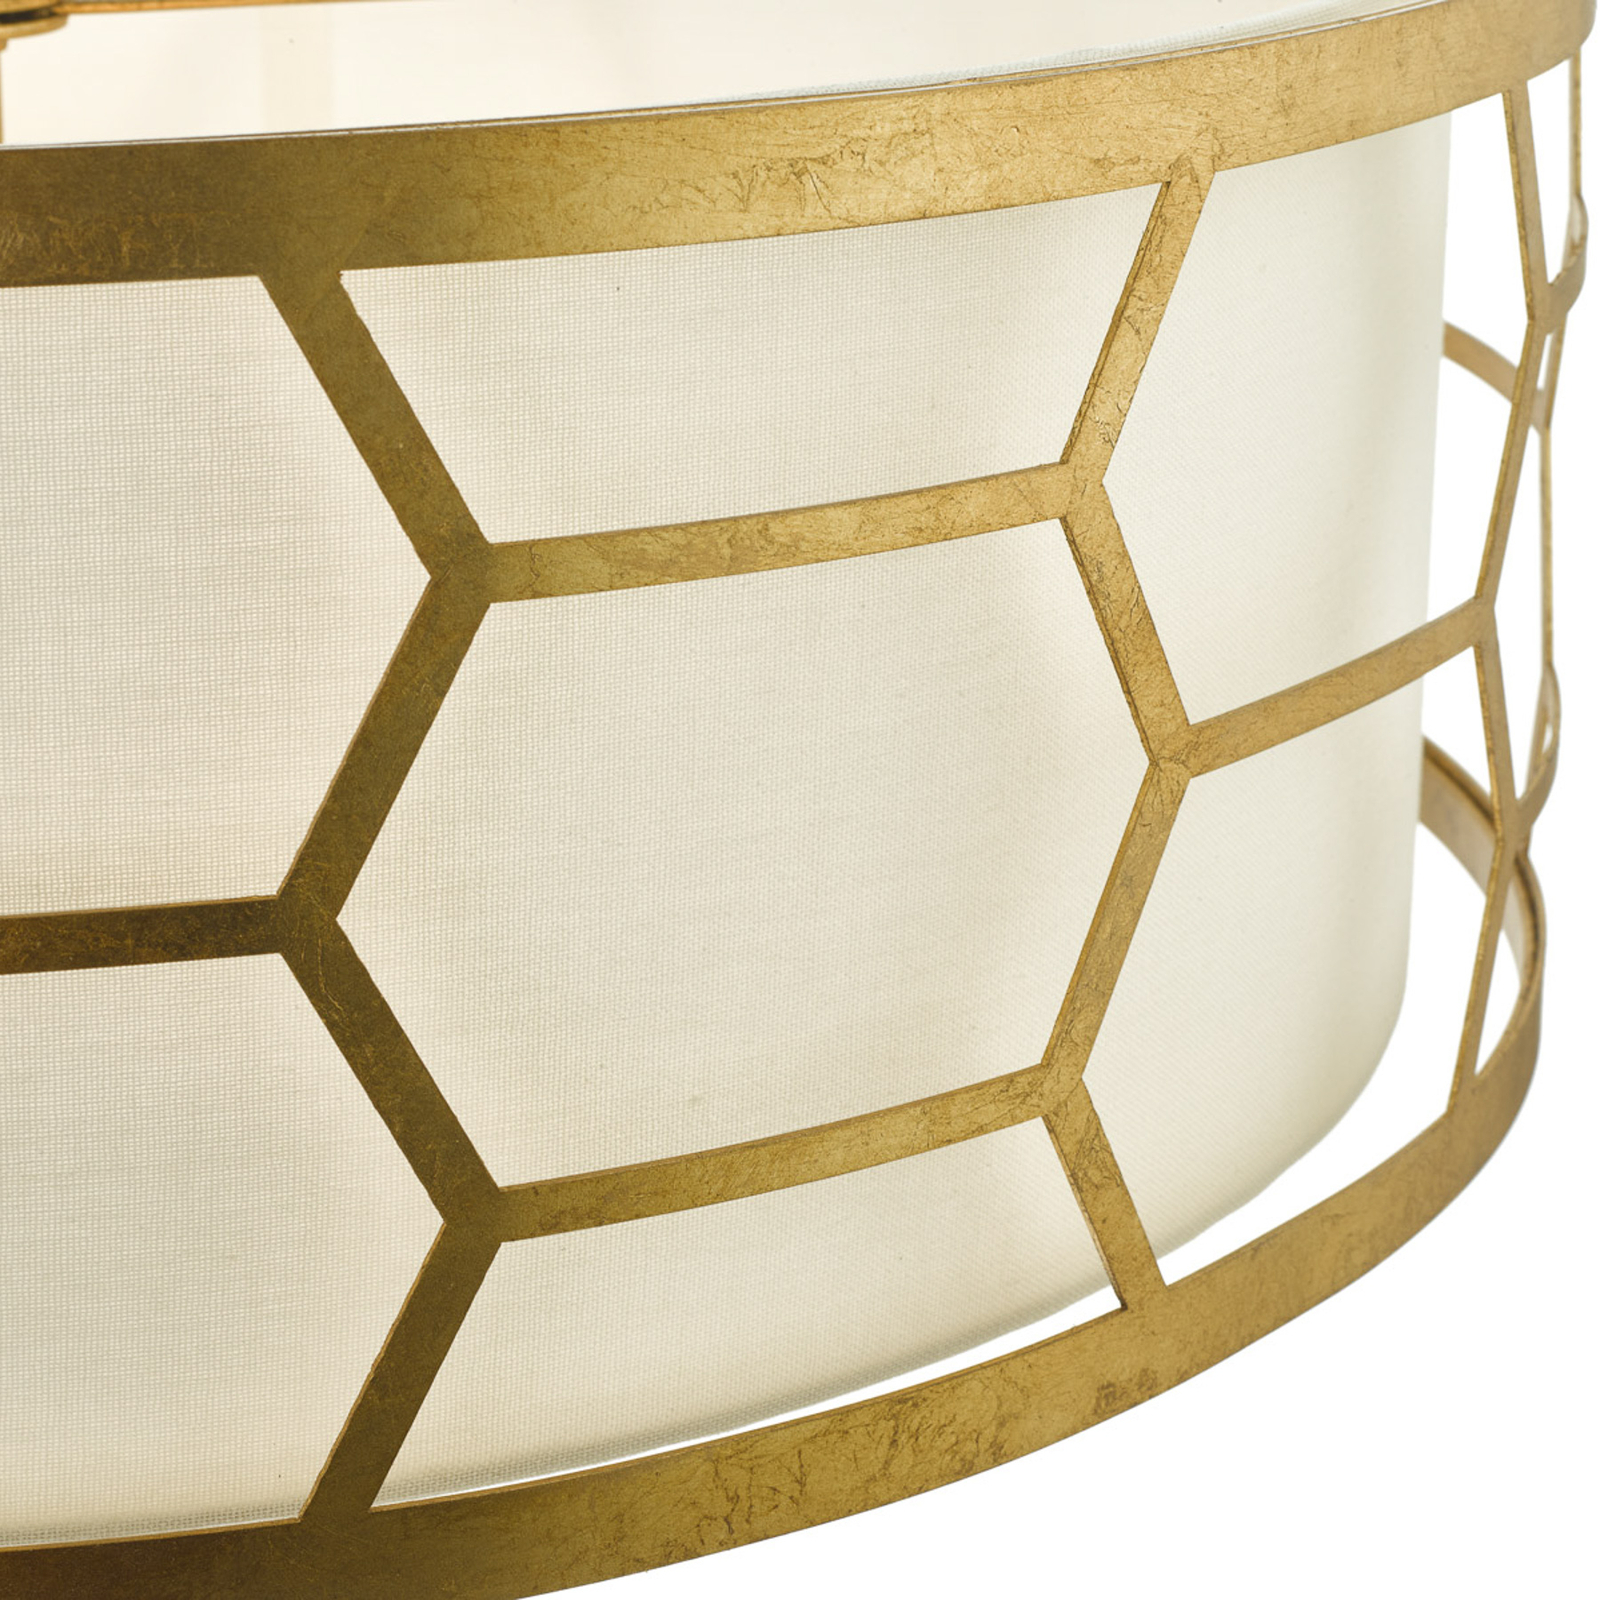 Epstein pendant light in gold and ivory, Ø 64cm